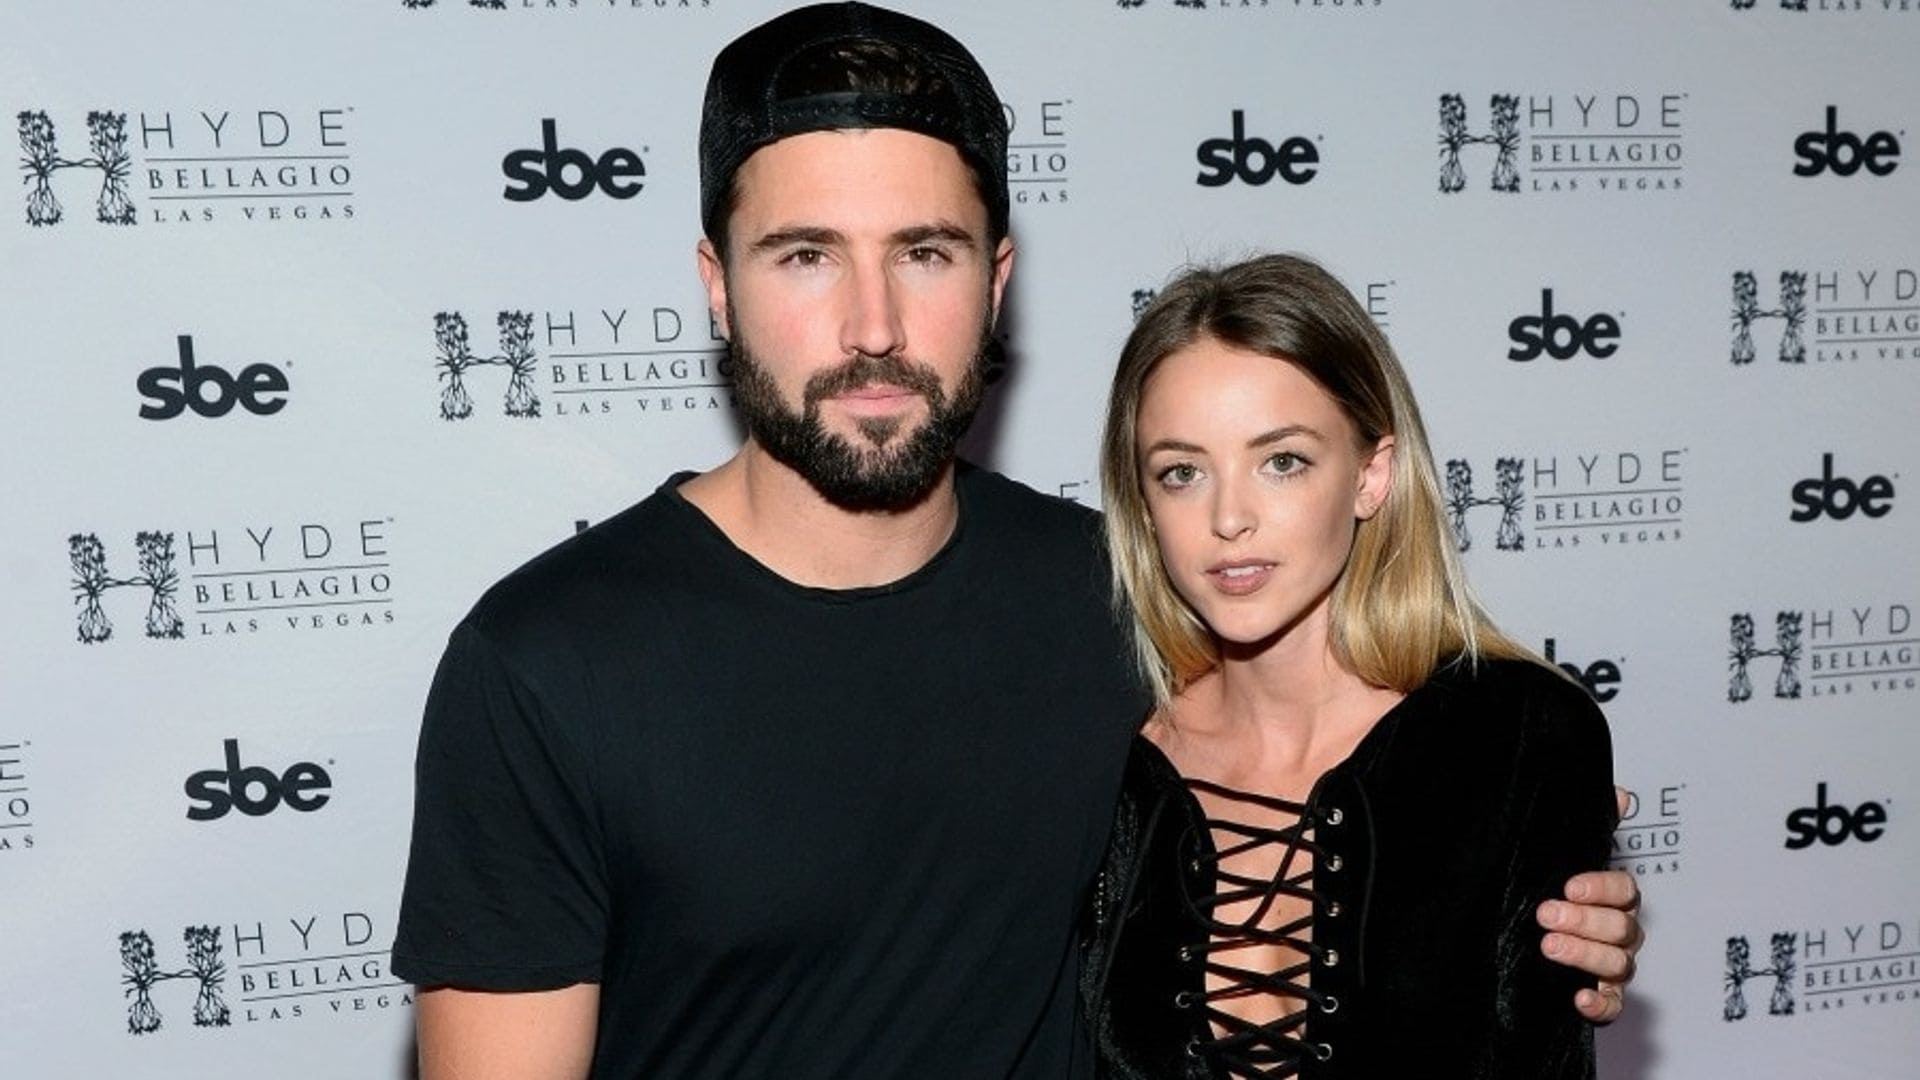 See the huge diamond ring Brody Jenner picked to propose to Kaitlynn Carter